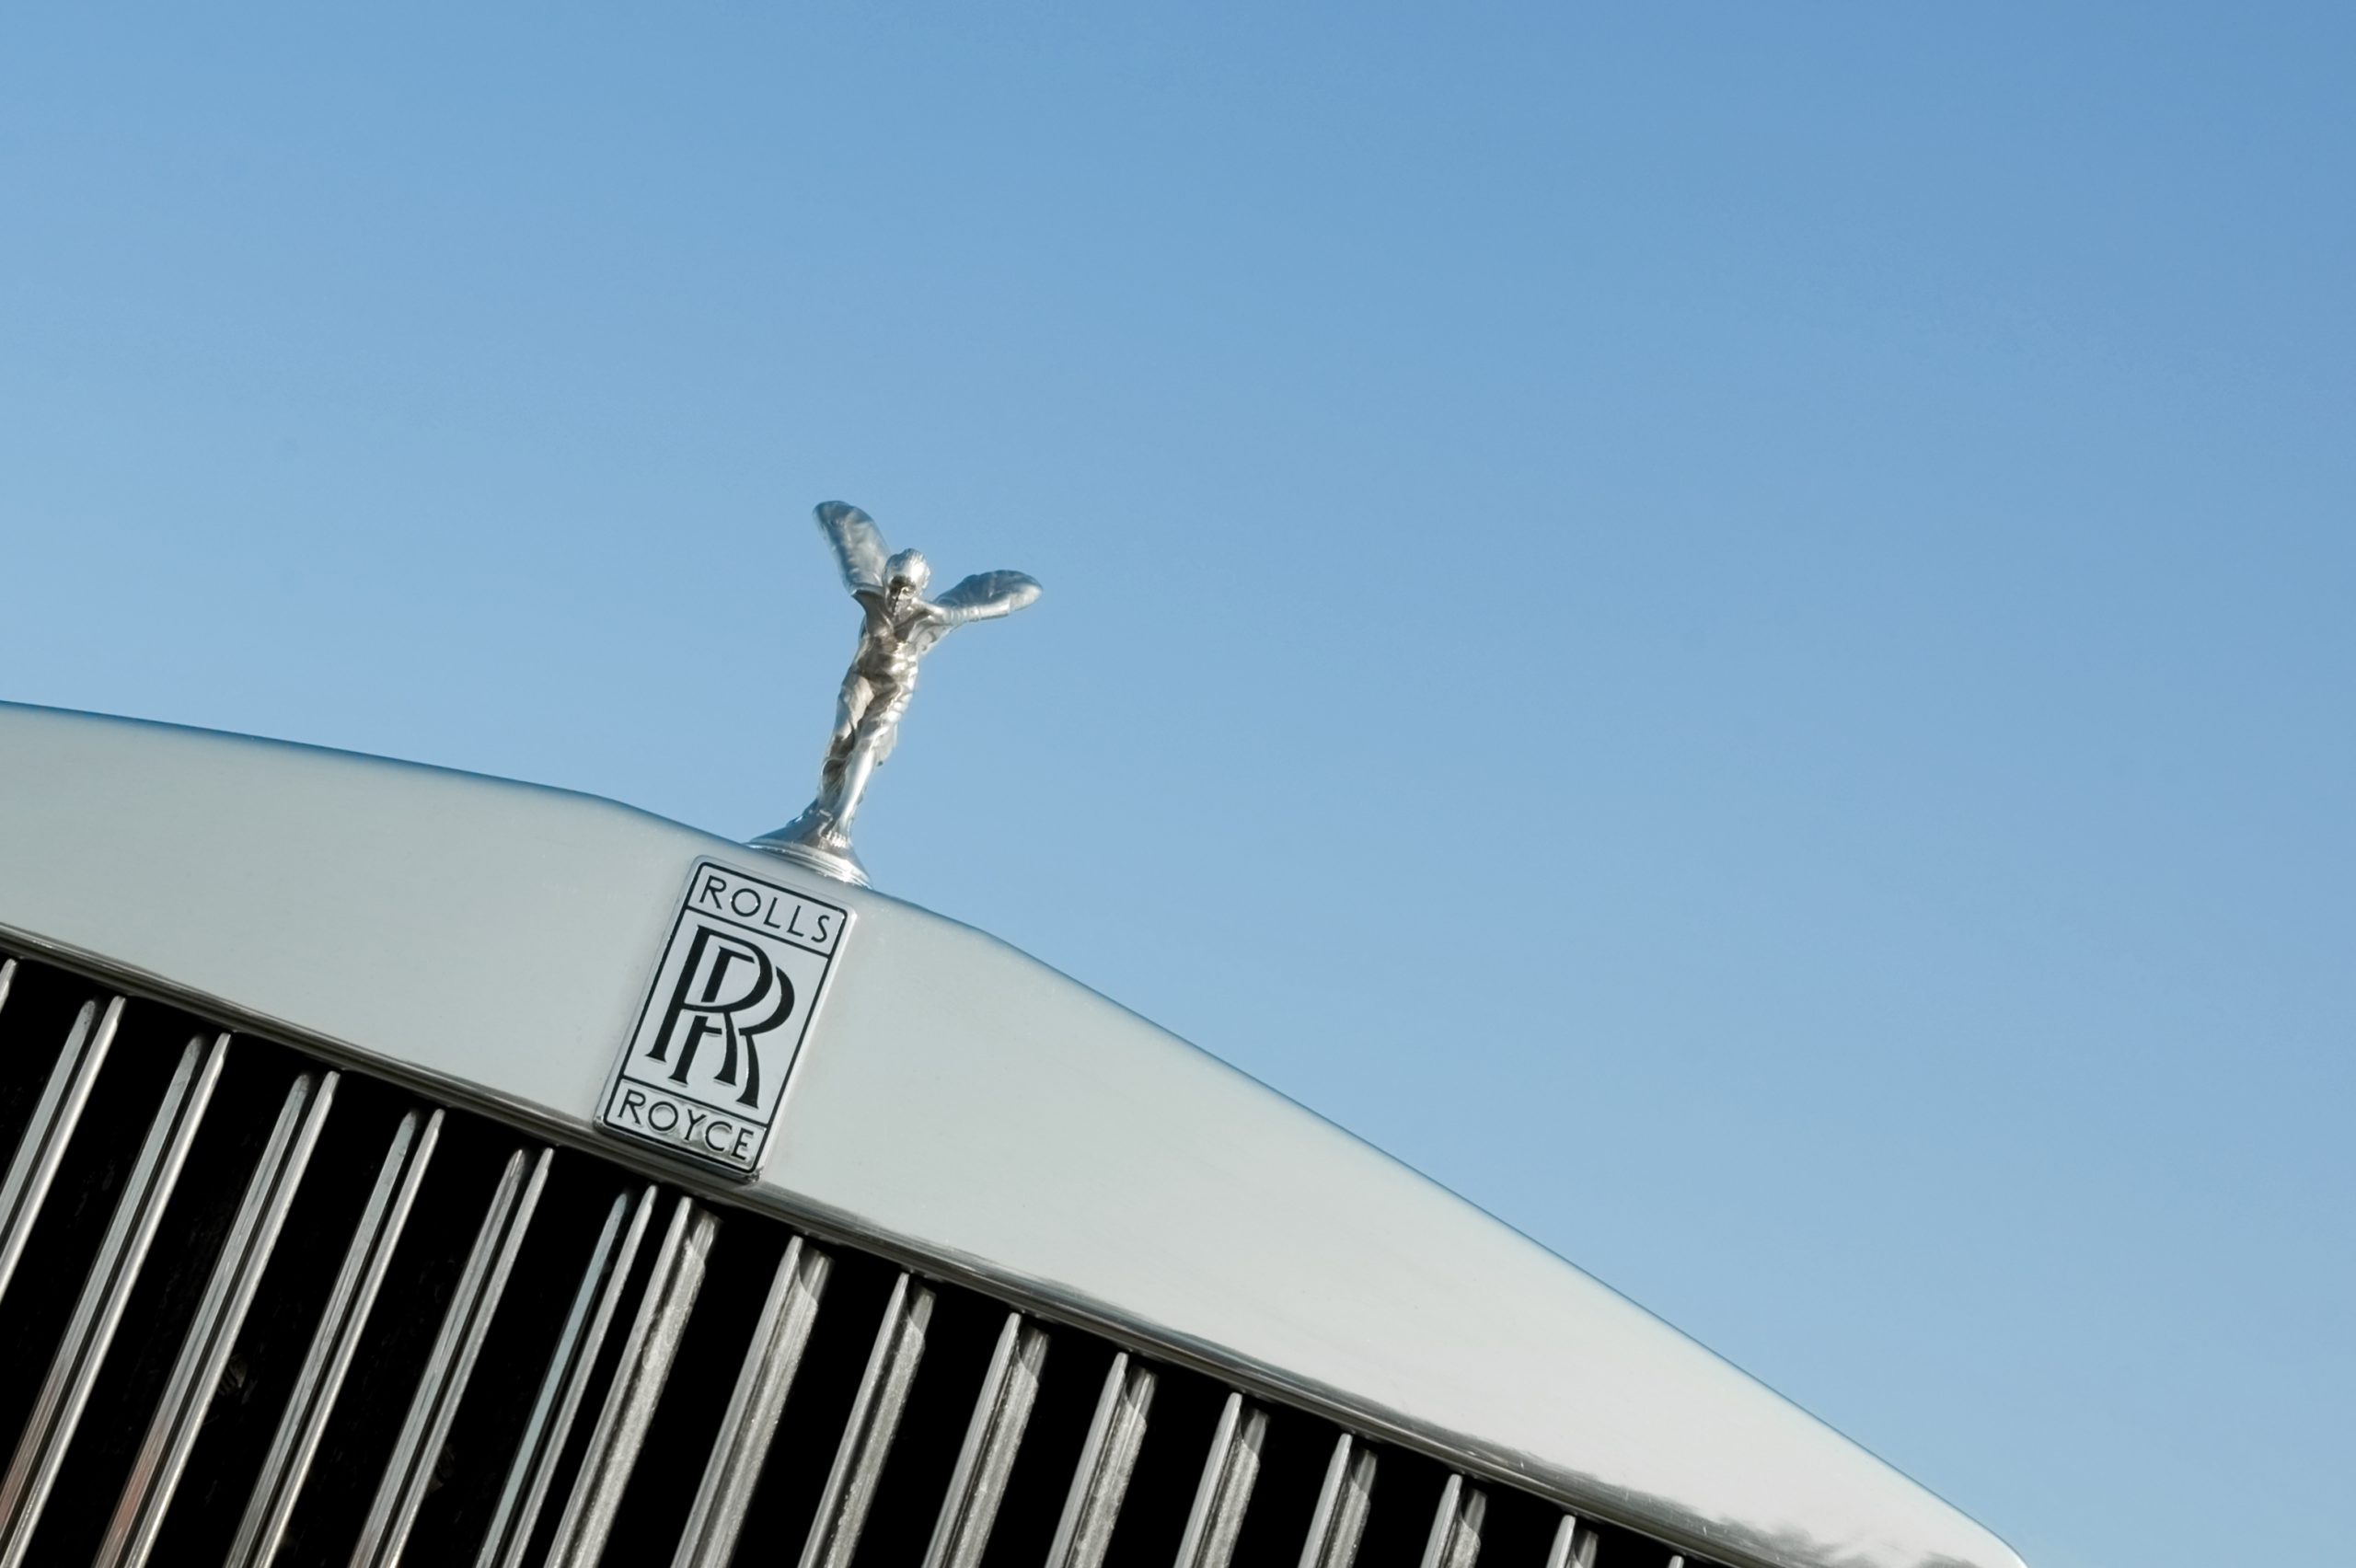 "Rushmoor, UK - April 22, 2011: The Rolls Royce Spirit of Ecstasy vehicle hood mascot, sometimes known as The Silver Lady was designed by Charles Robinson Sykes; and is one of the worlds most recognisable corporate images."